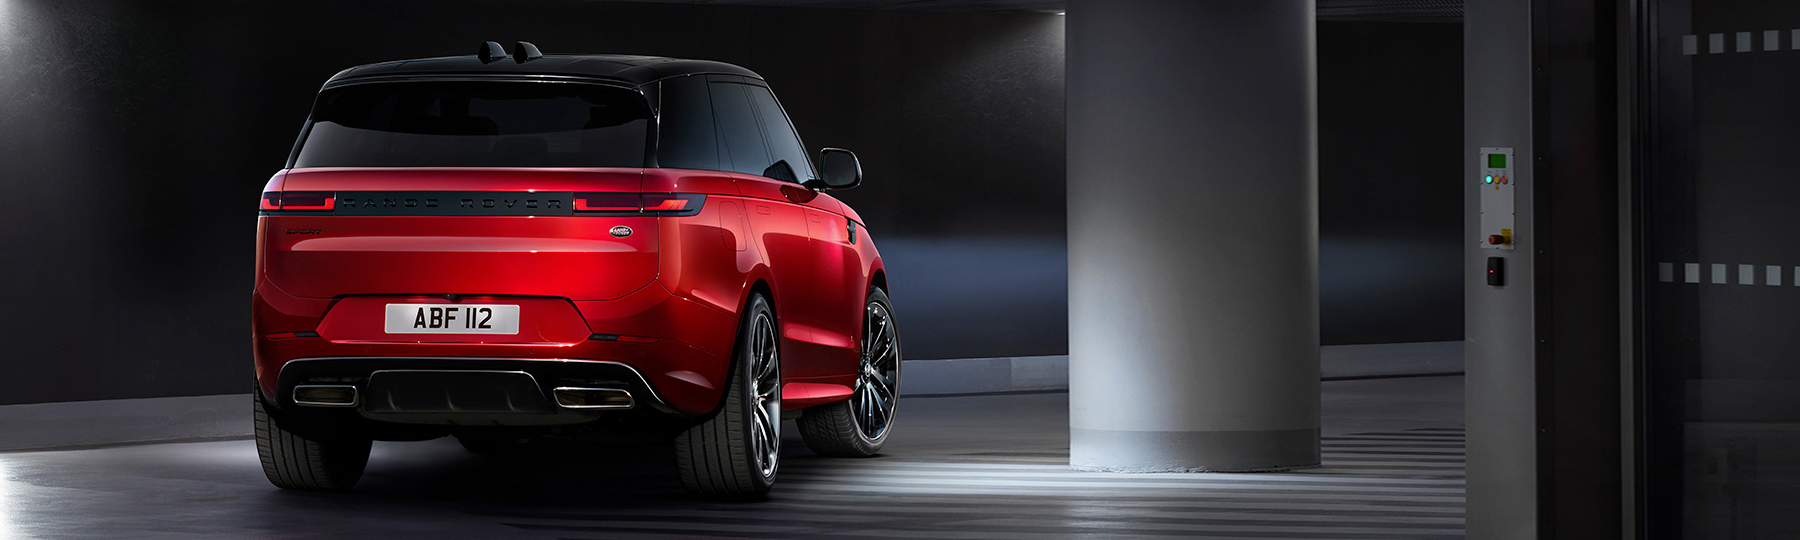 New Land Rover Range Rover Sport Personal Contract Hire Offer